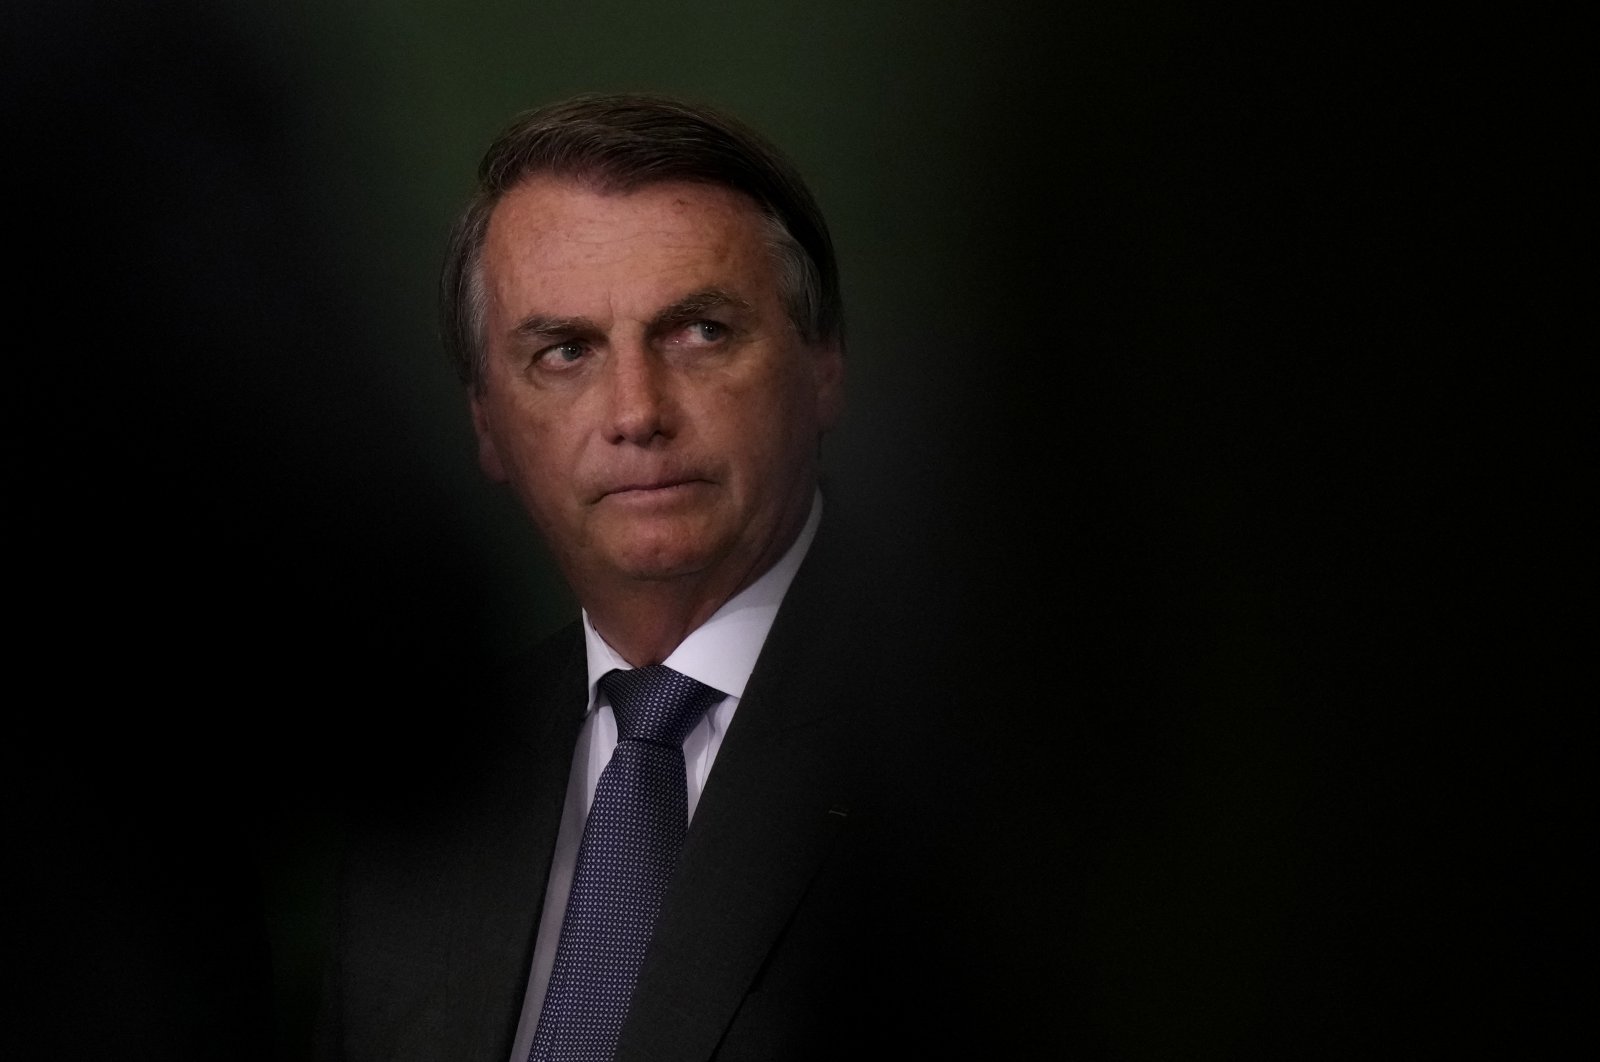 Brazil's President Jair Bolsonaro attends the launching ceremony of the National Green Growth Program at the Planalto presidential palace in Brasilia, Brazil, Oct. 25, 2021. (AP Photo)